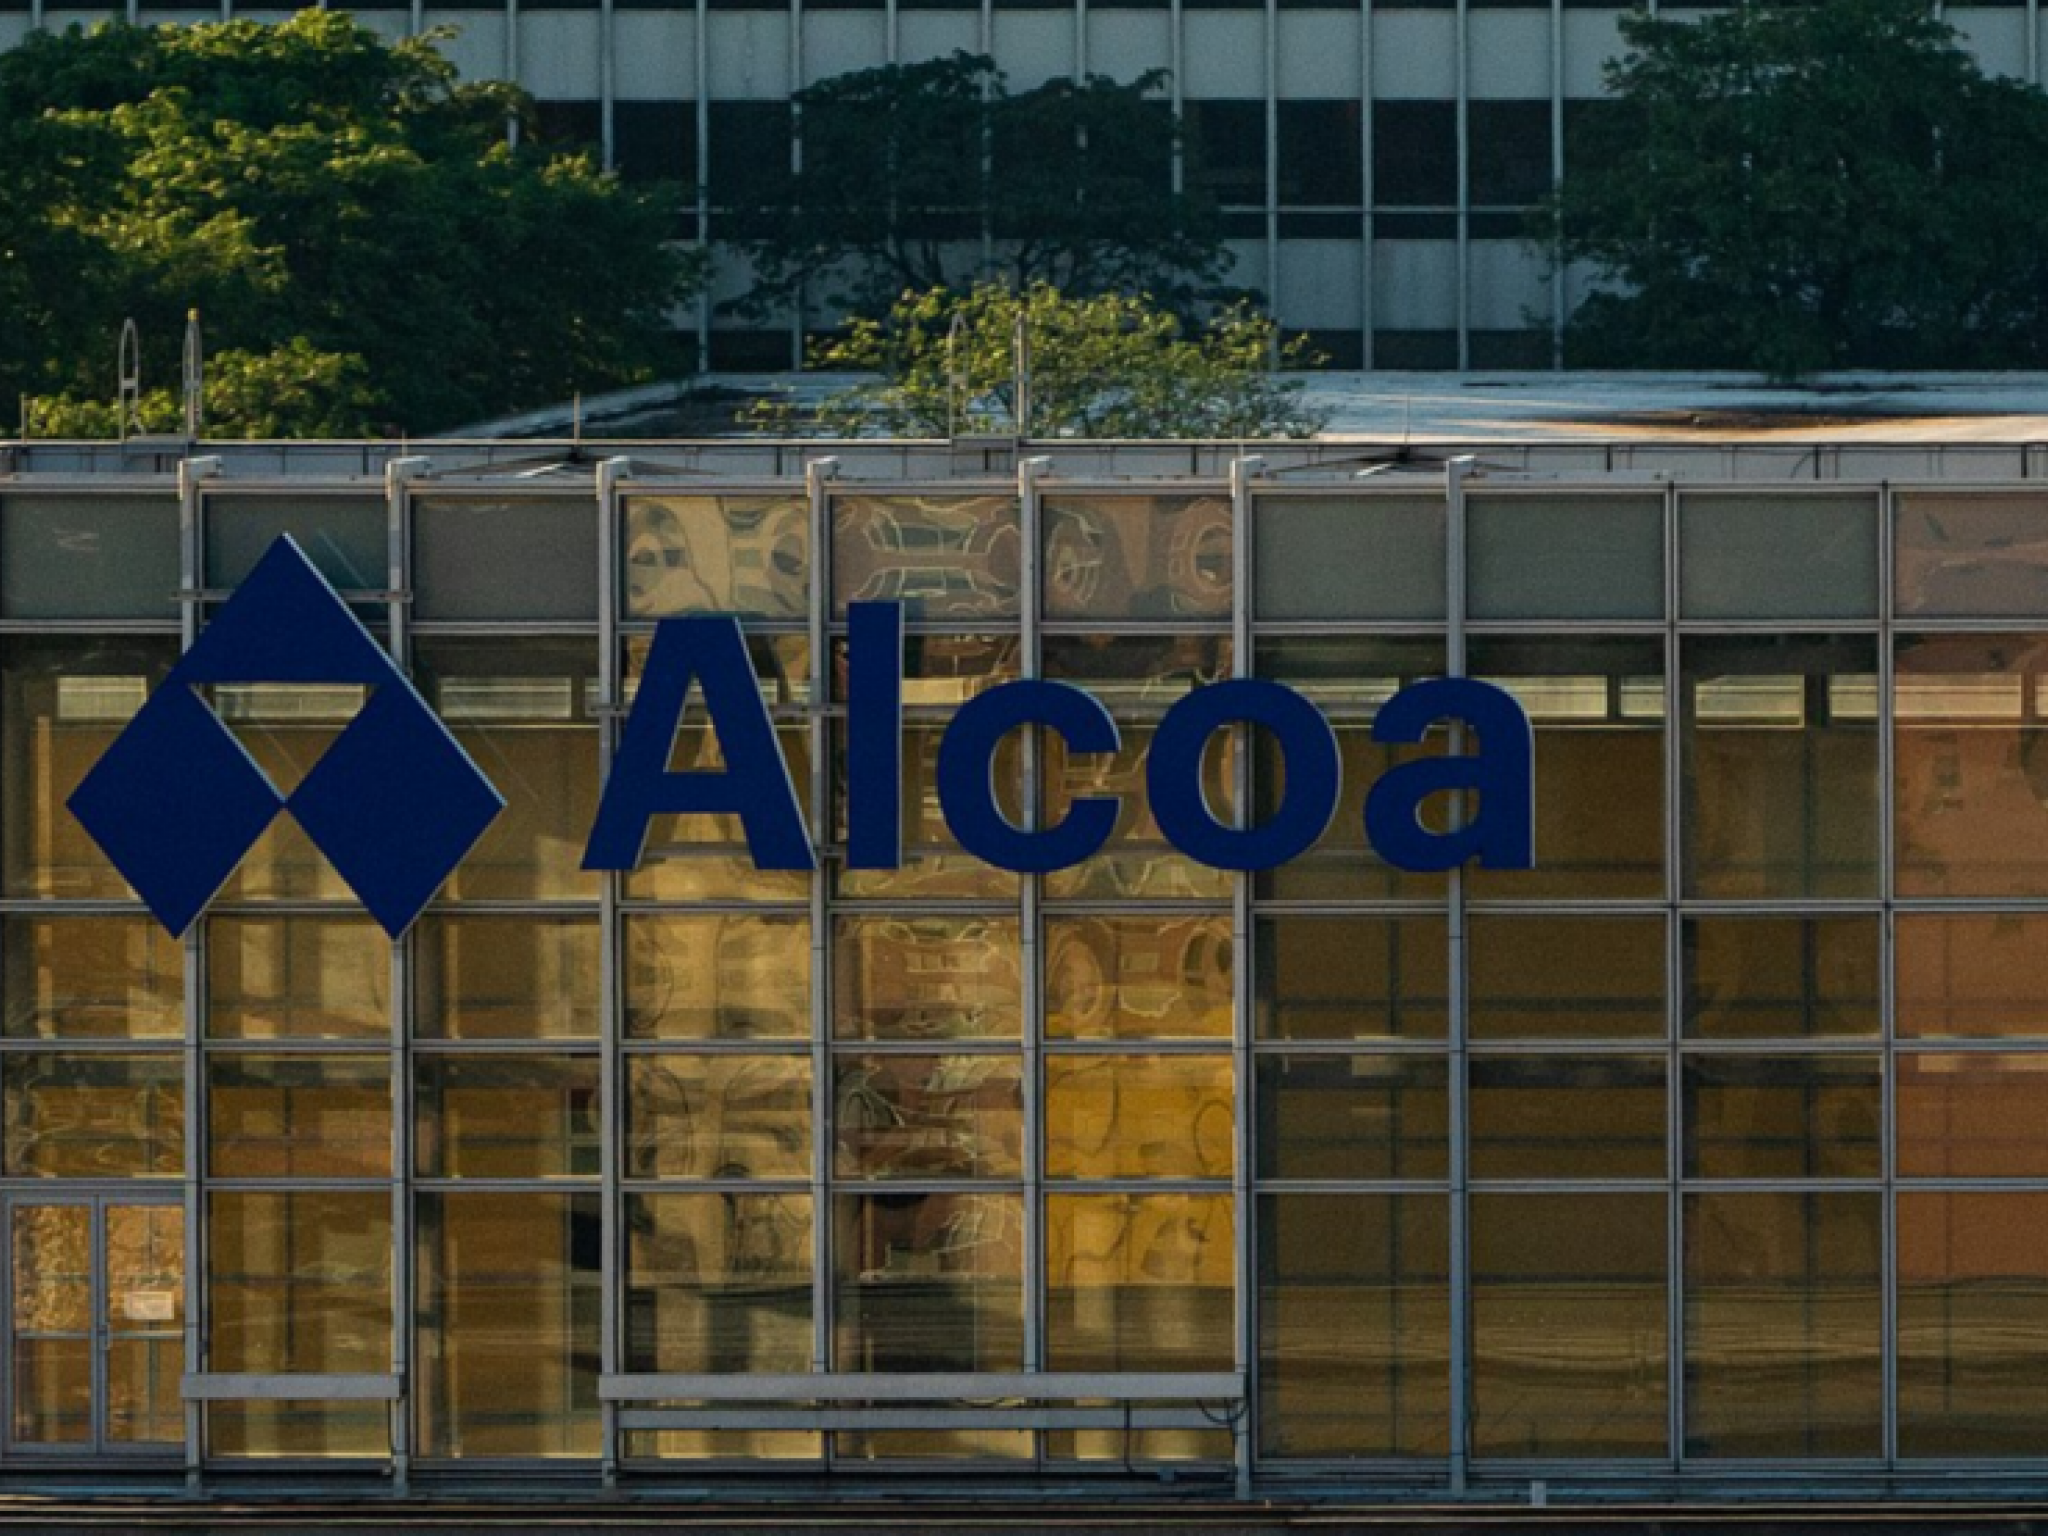  alcoas-profitability-program-reaping-results---analyst-sees-tailwinds-from-lagged-alumina-pricing 